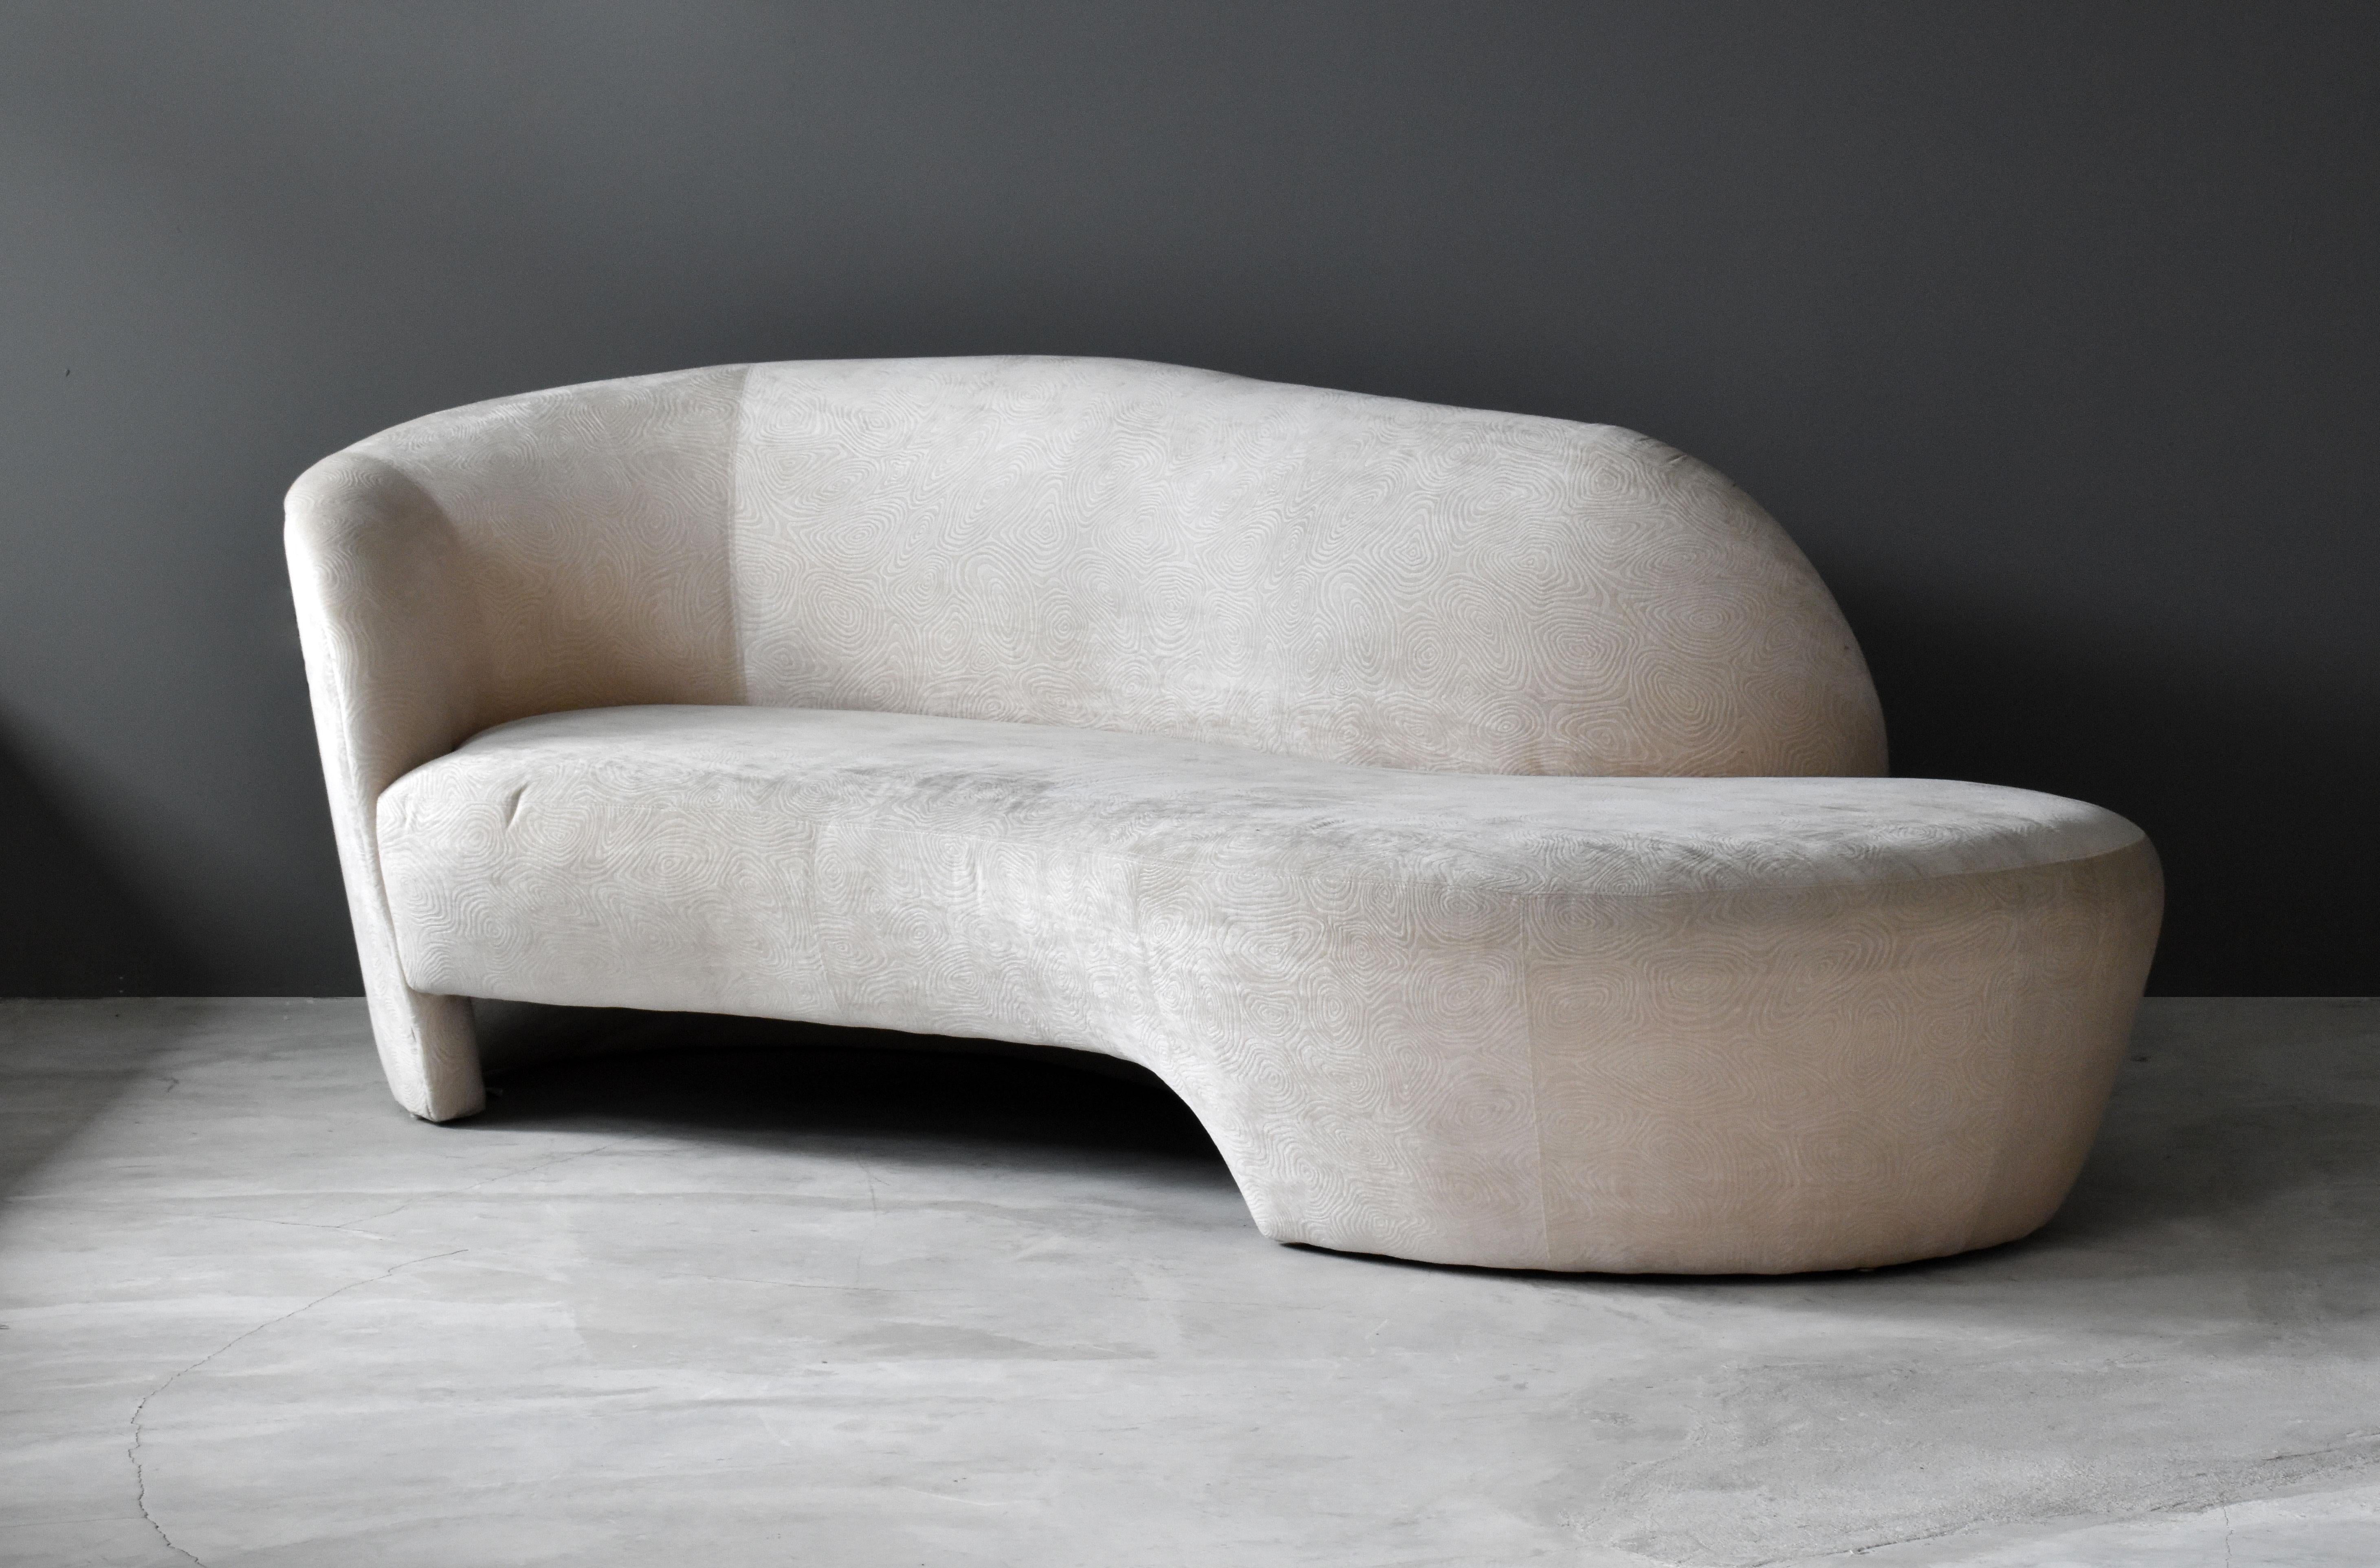 An organic sofa designed by Vladimir Kagan for Weiman preview furniture.

Sofa is in its original fabric and would benefit from reupholstery.







 